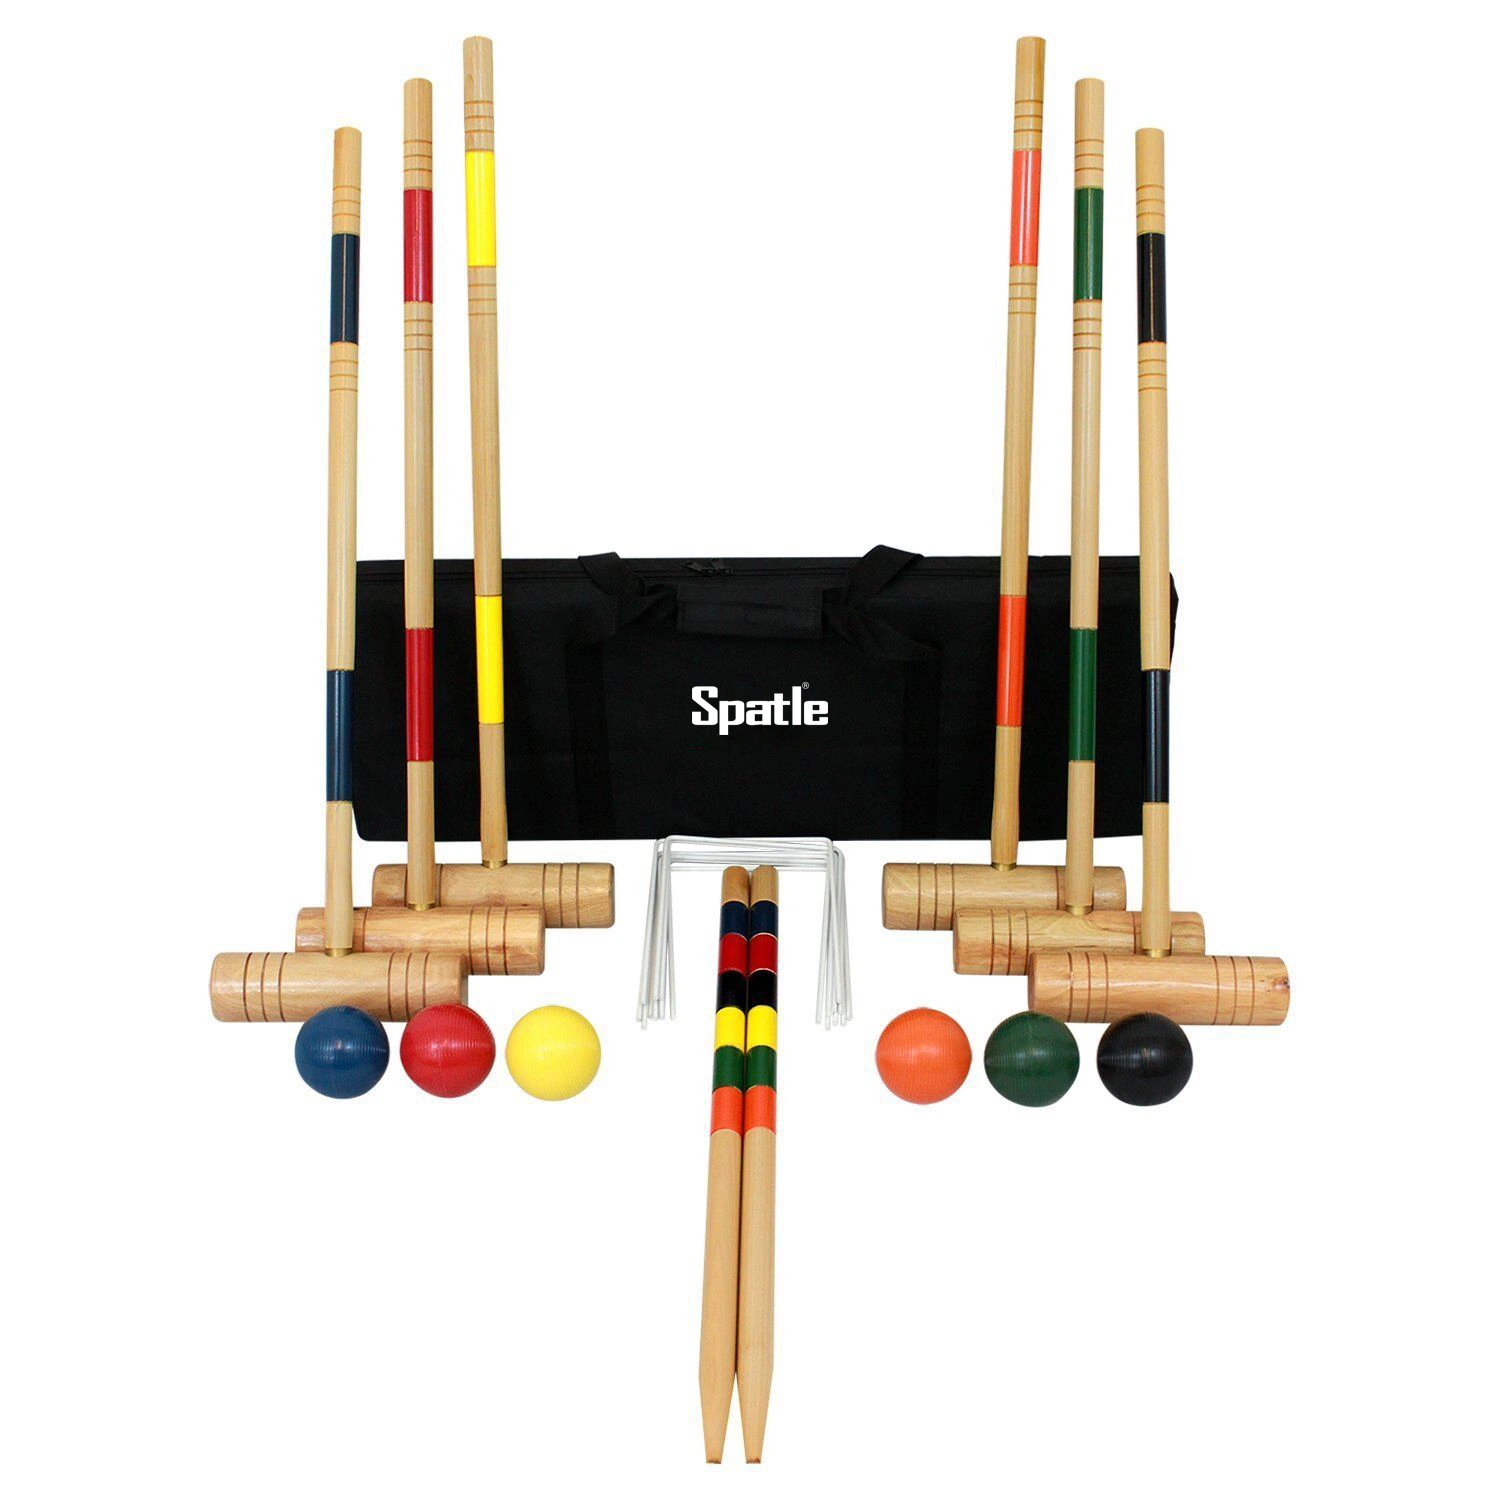 Professional Croquet Set with 6 Mallets for Outdoor Lawn Games